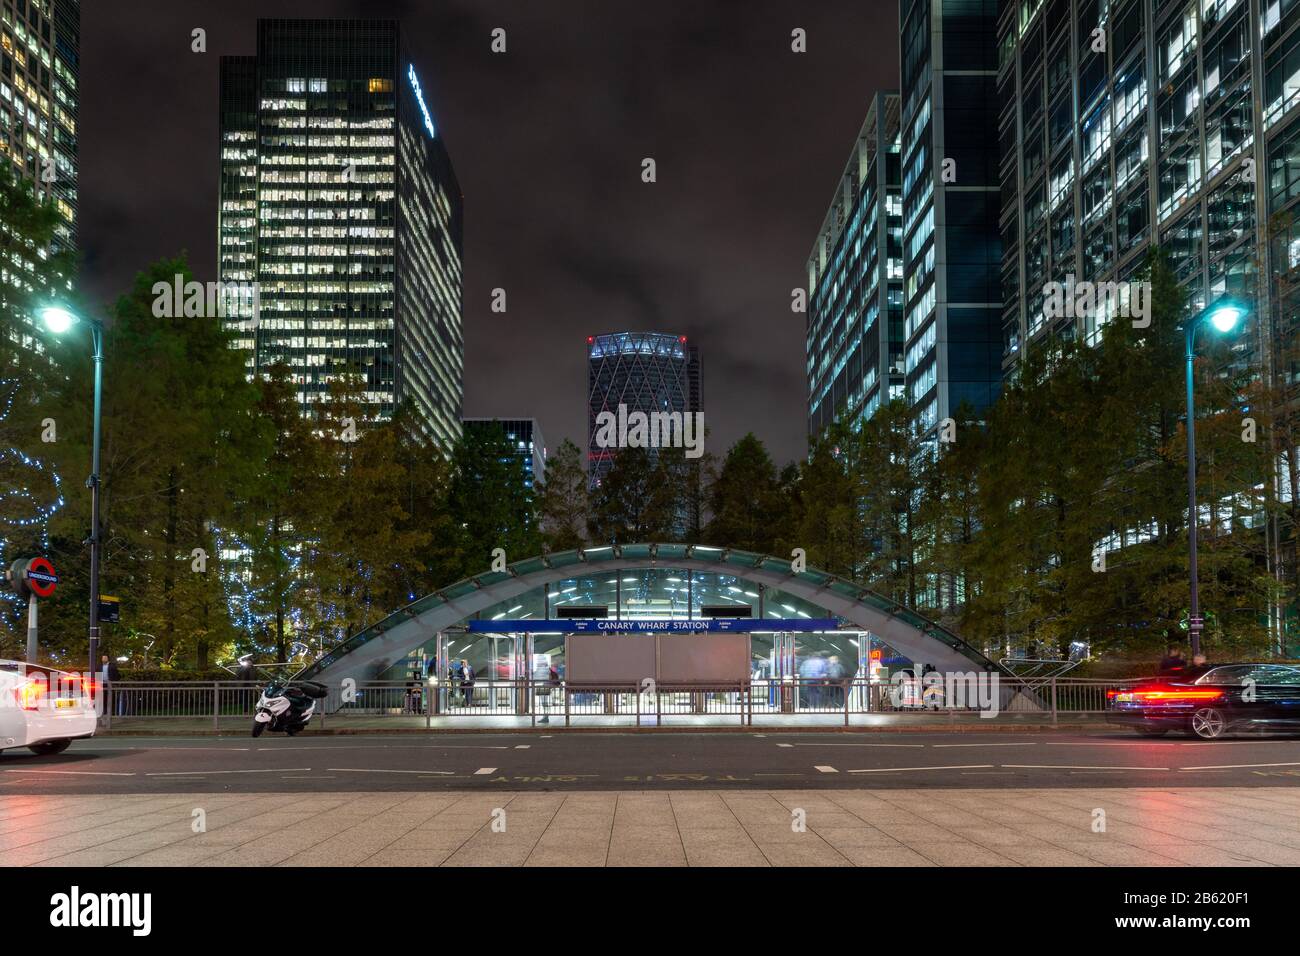 London, England, UK - November 11, 2019 Commuters use Canary Wharf tube station at rush hour in the Docklands business district of London. Stock Photo